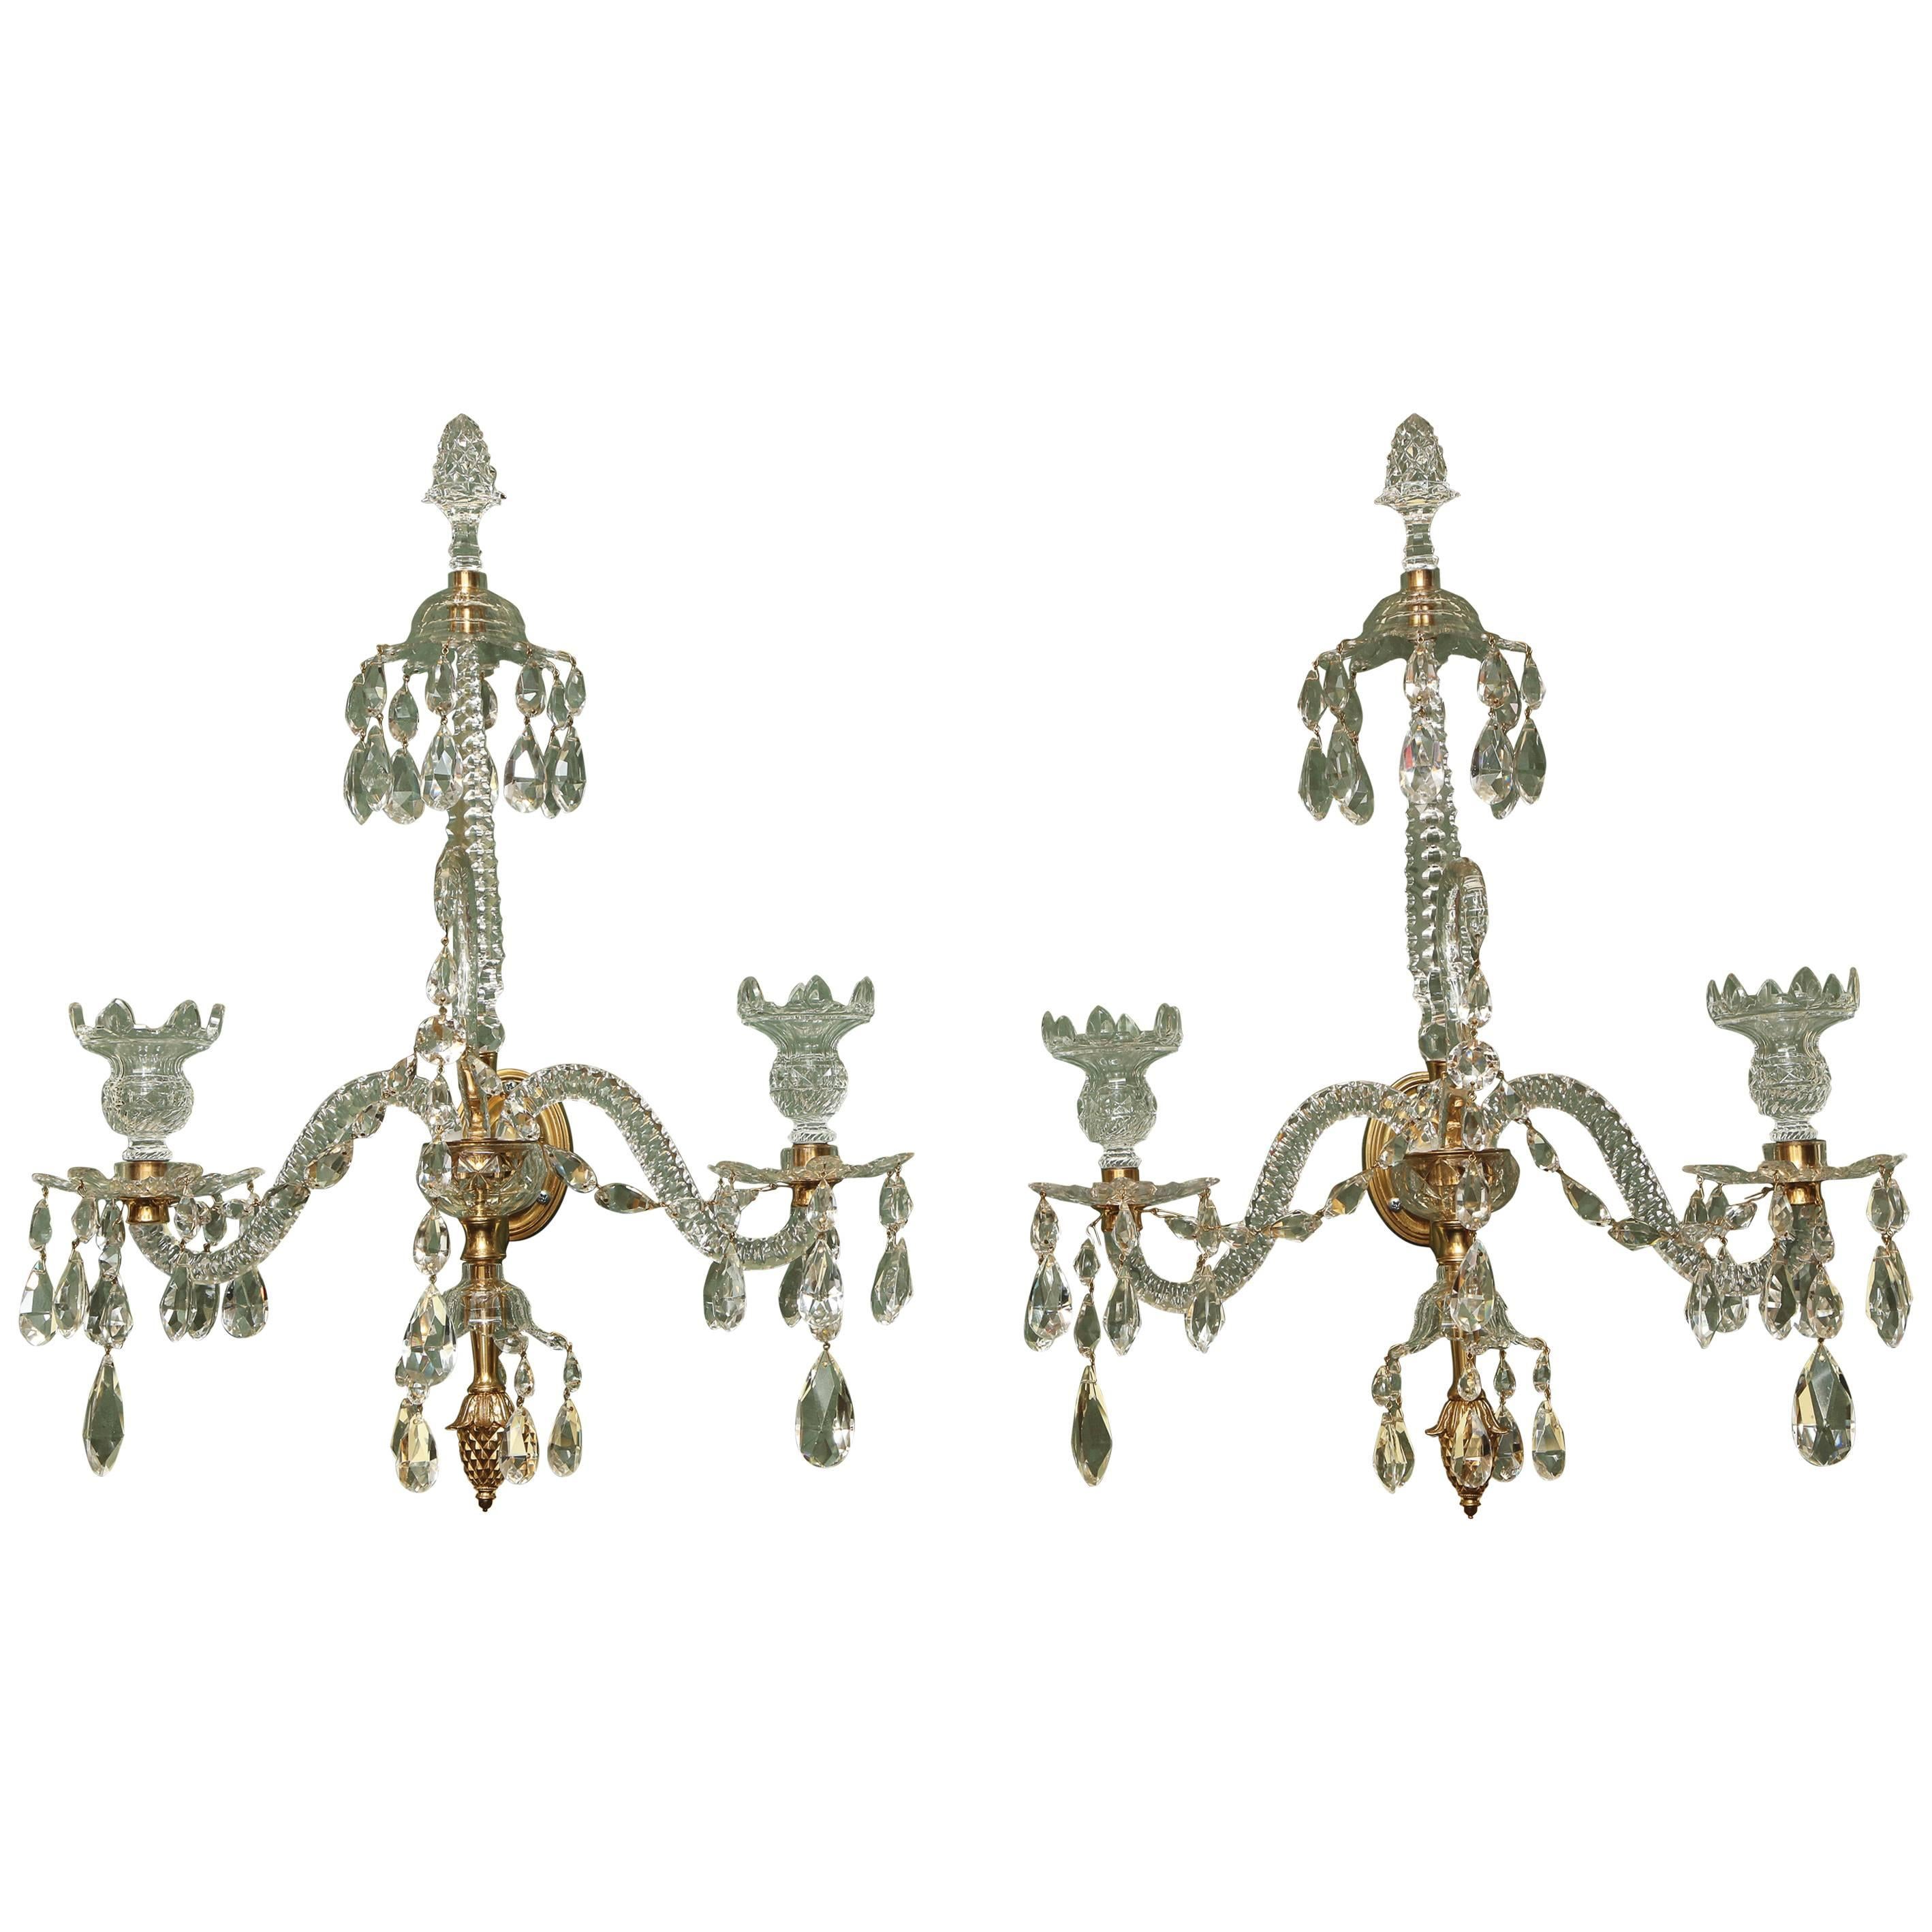 Pair of Adam Cut Crystal and Ormolu Two-Light Wall Sconces, English, circa 1775 For Sale